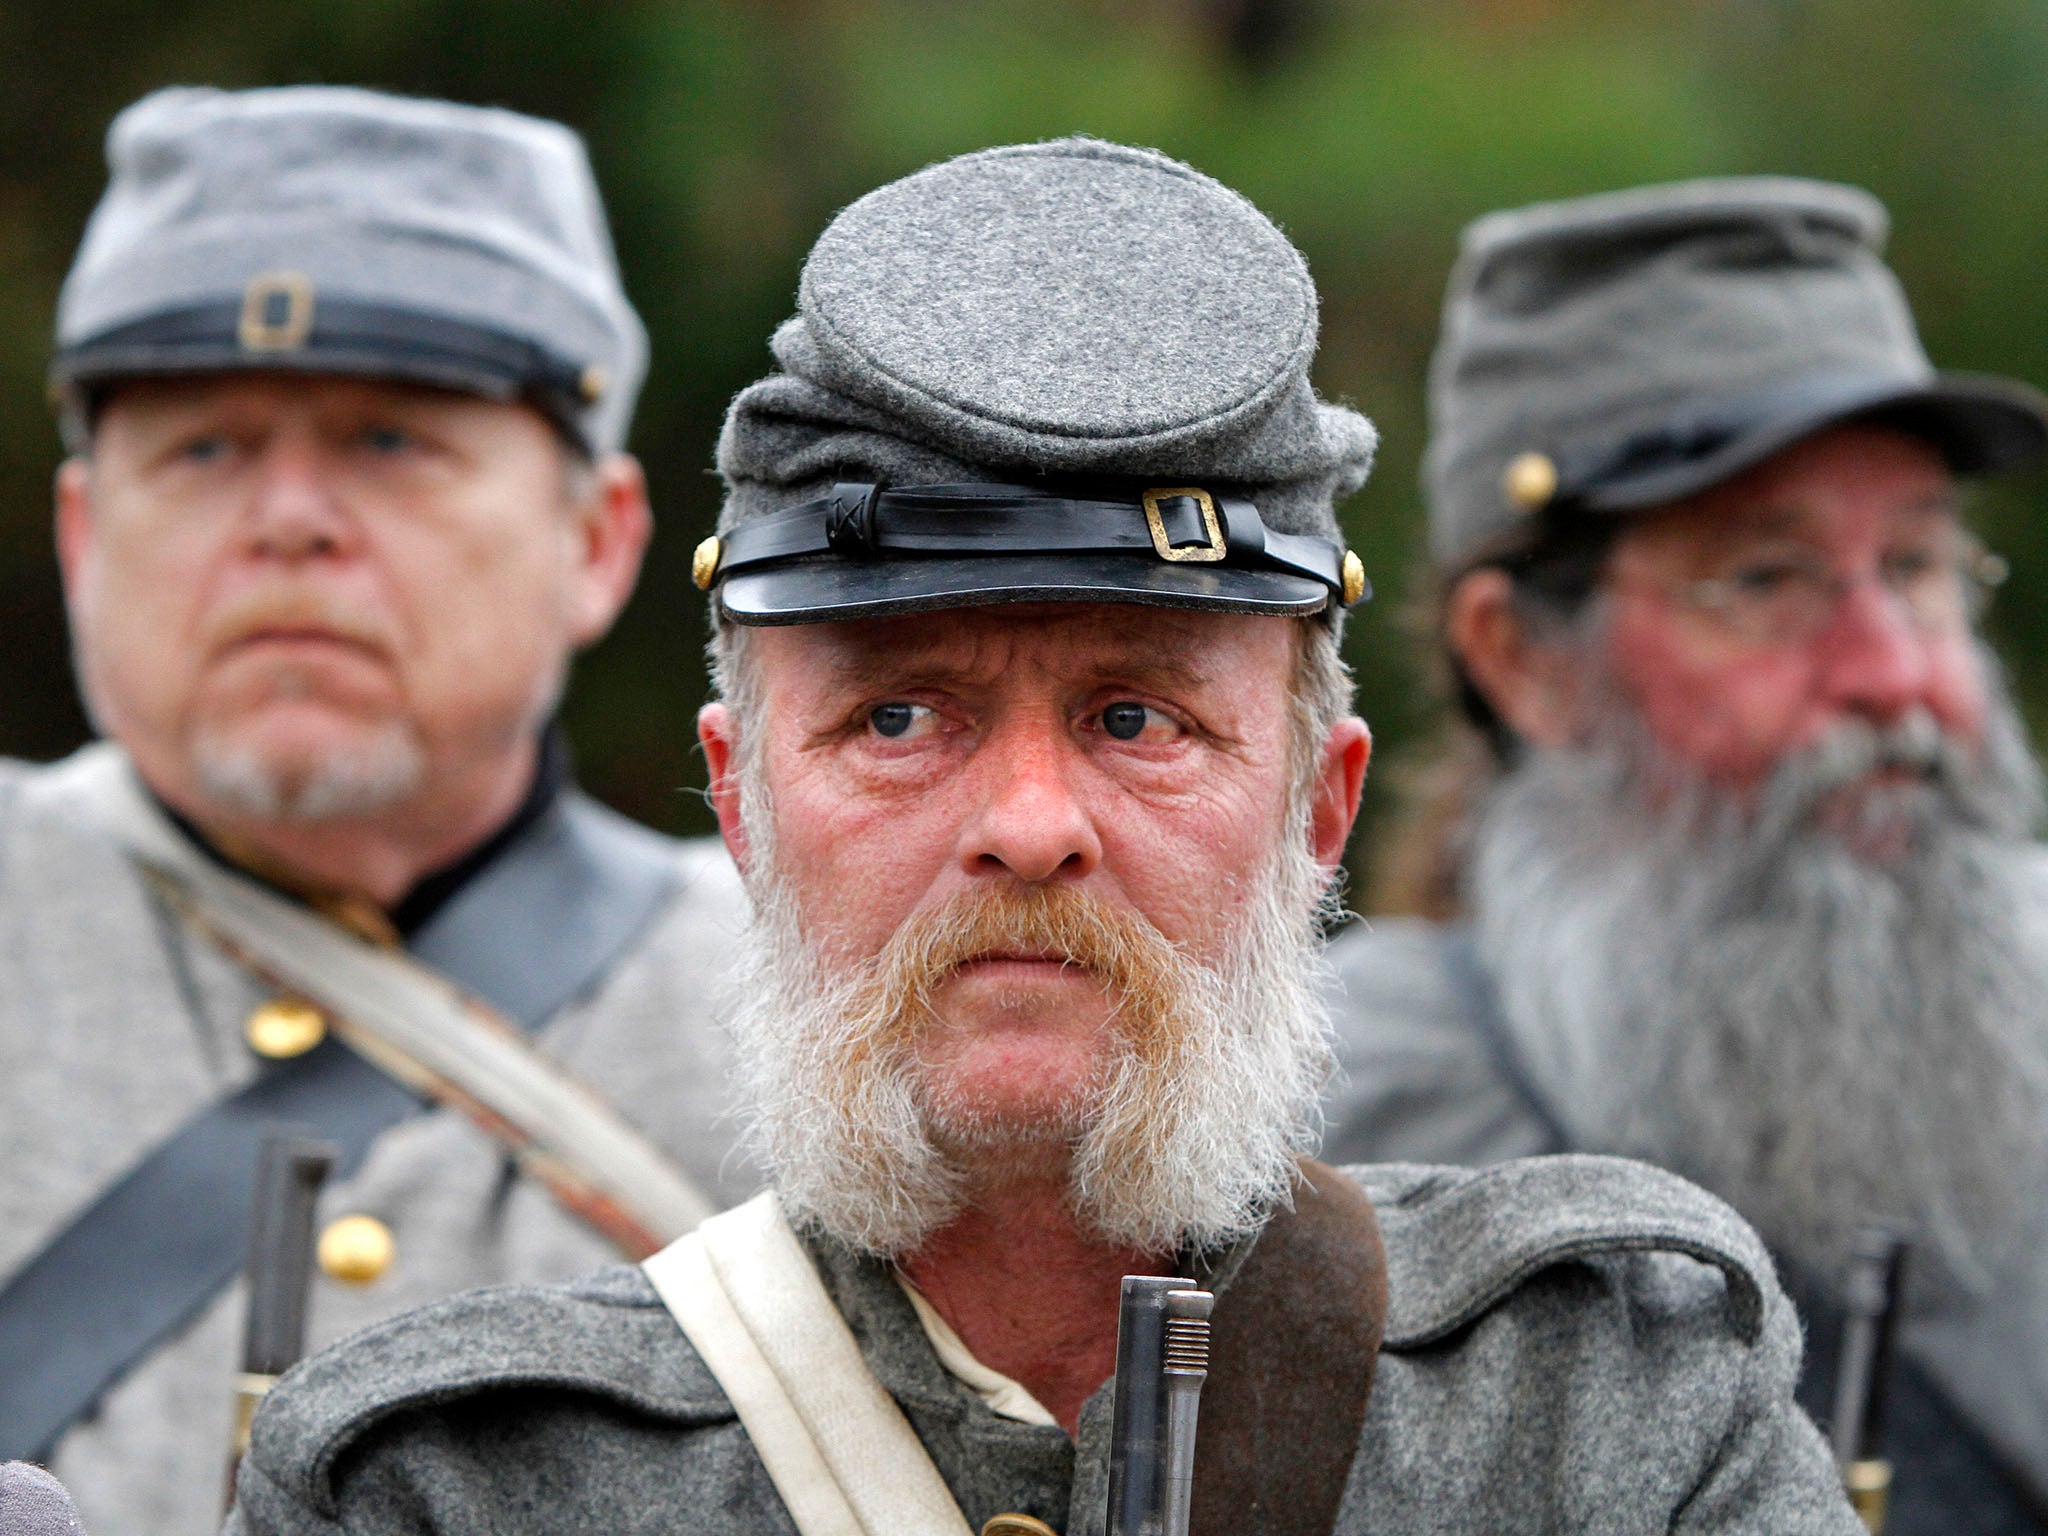 Soldiers take part in a re-enactment at Fredericksburg, Virginia to mark the 150th anniversary of the Civil War battle that took place in and around the town.